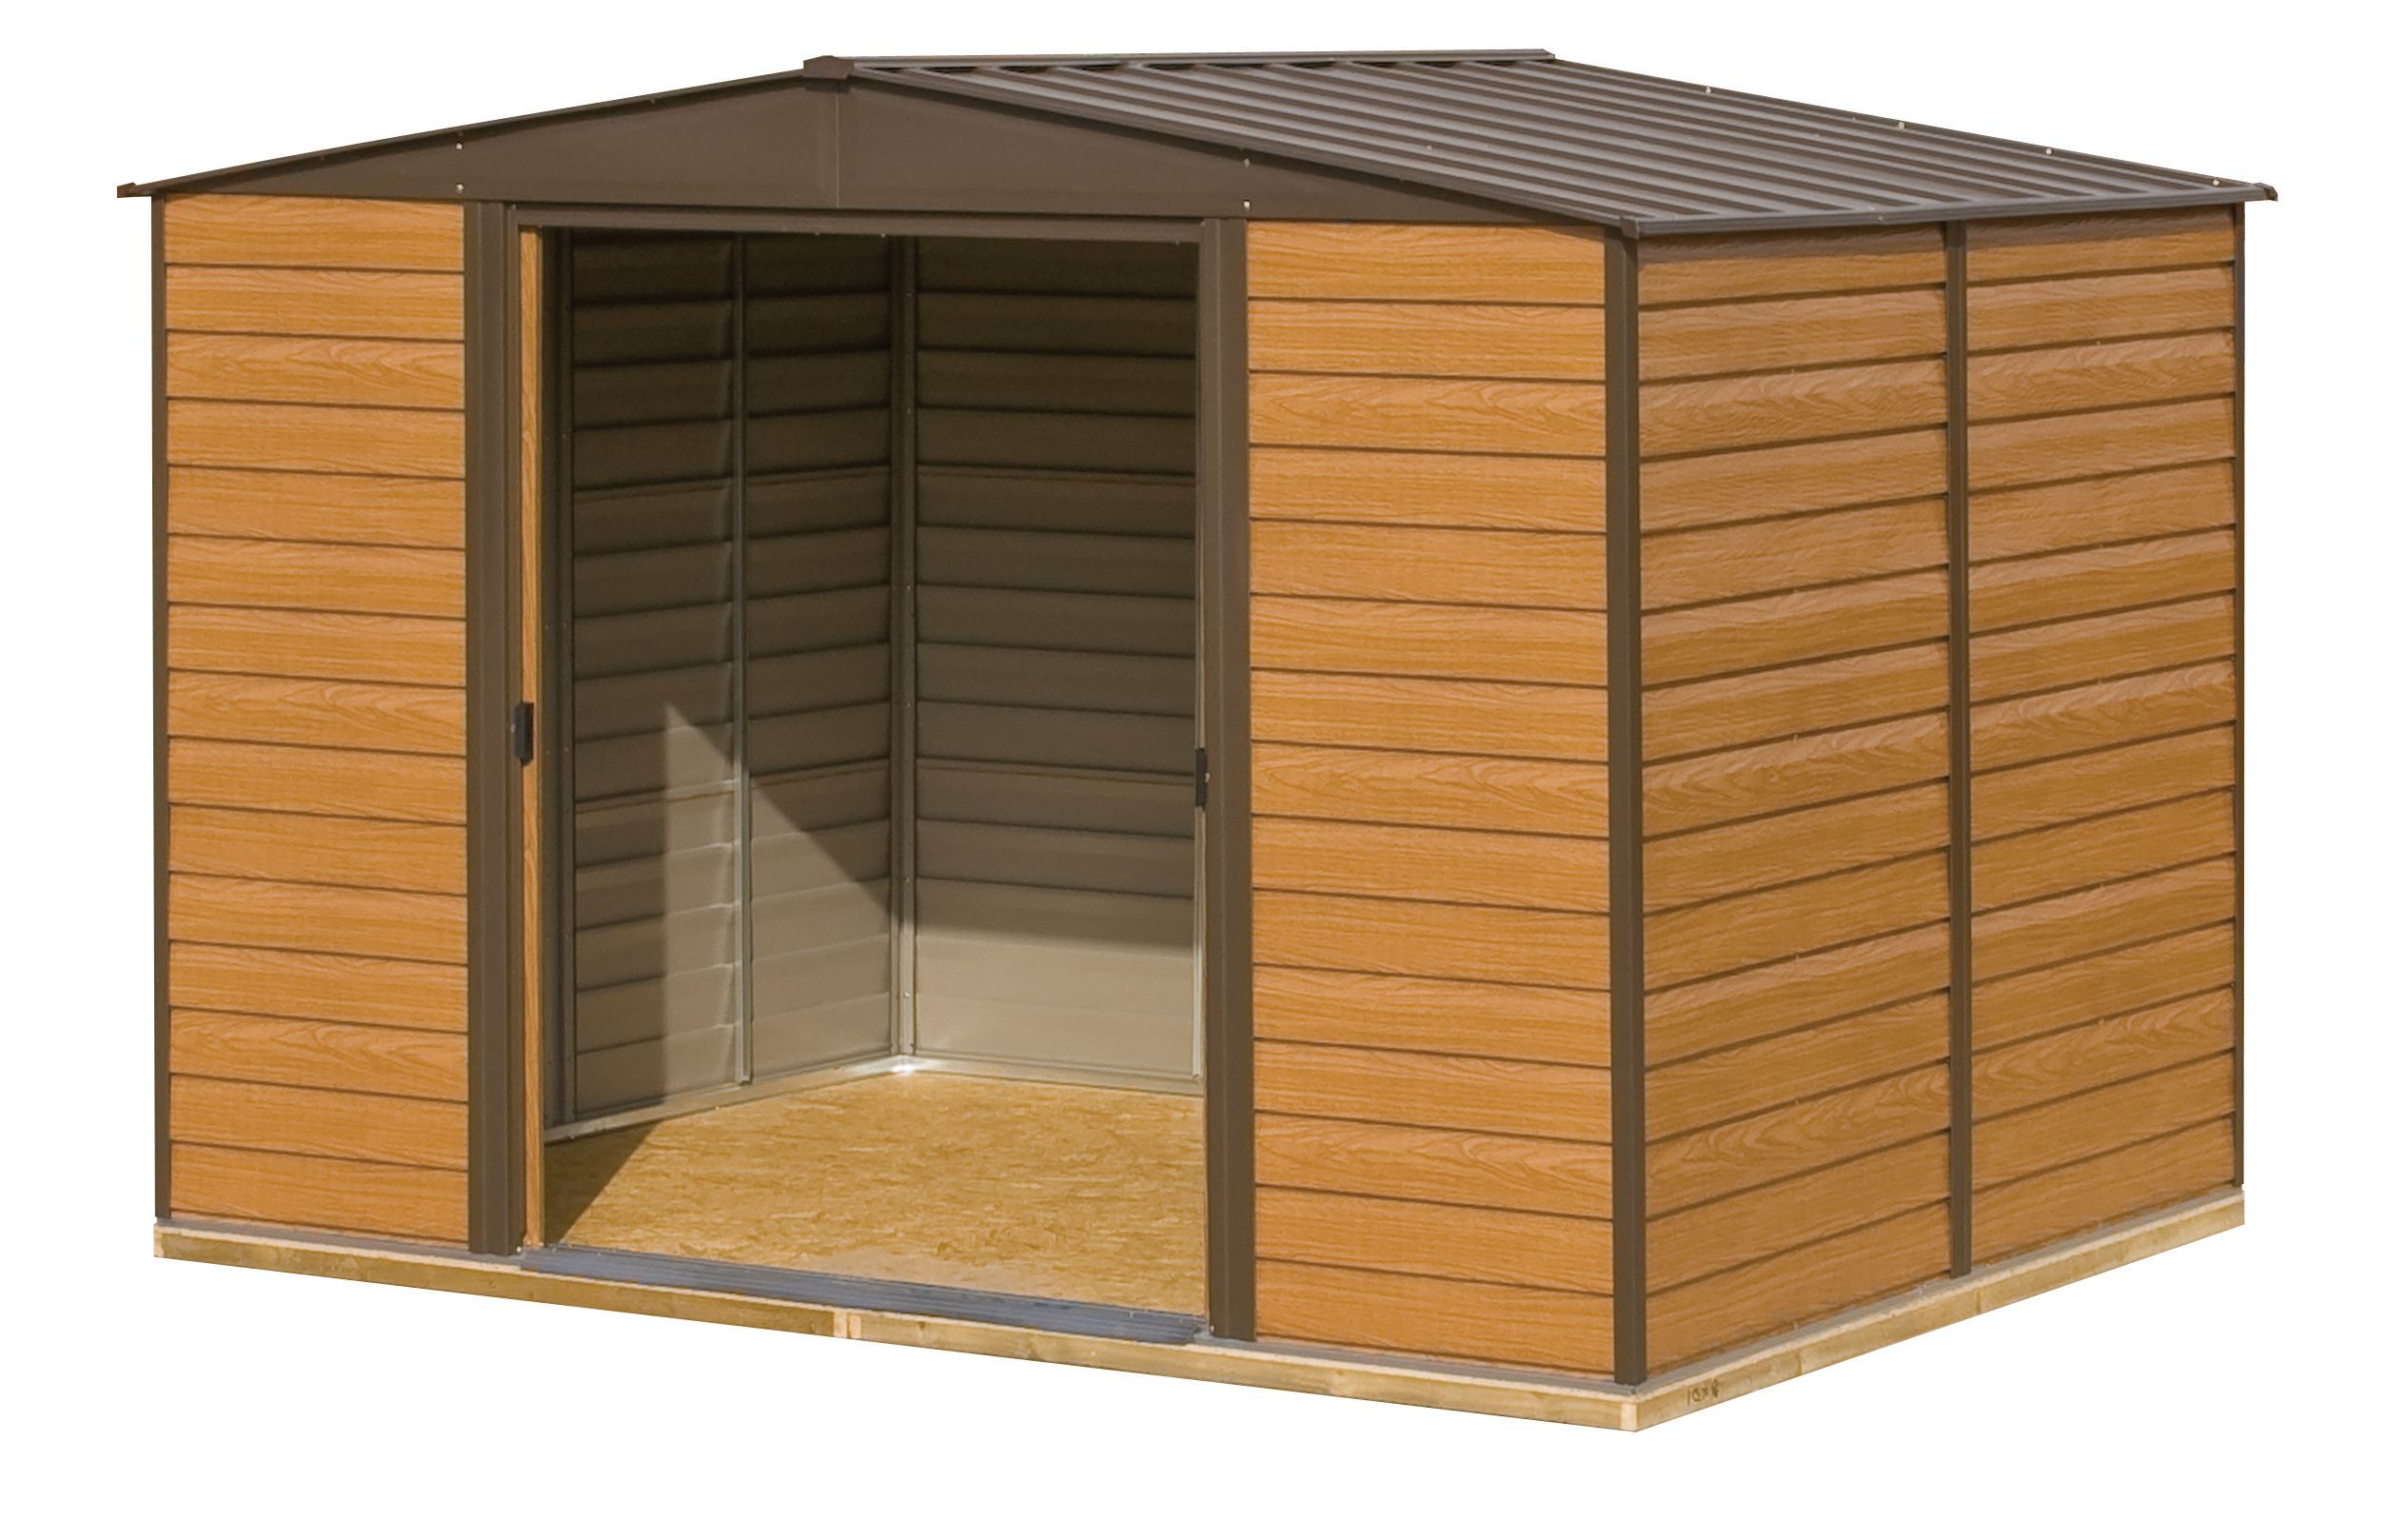 Image of Rowlinson Woodvale 10 x 12ft Large Double Door Metal Apex Shed including Floor